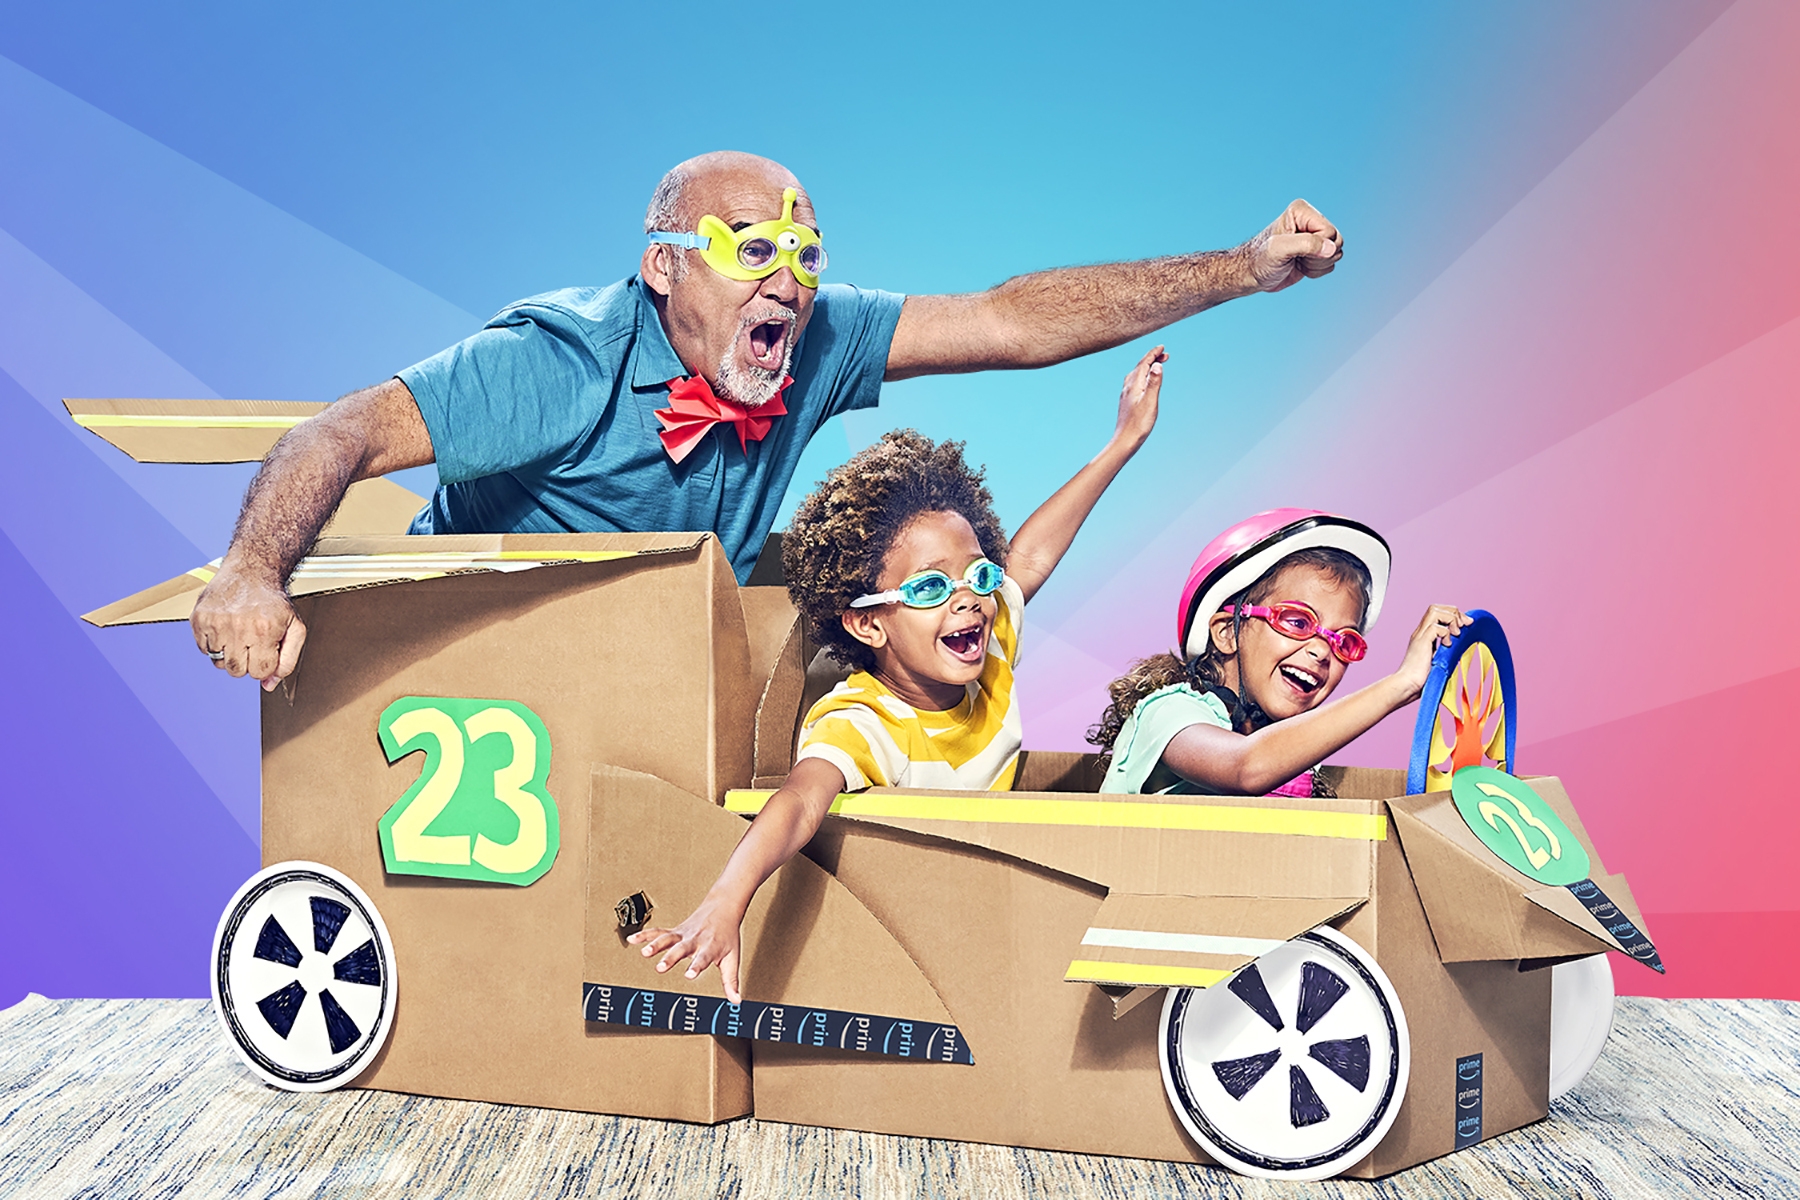 Two children and a man appear joyful as the "ride" in a cardboard box car. 